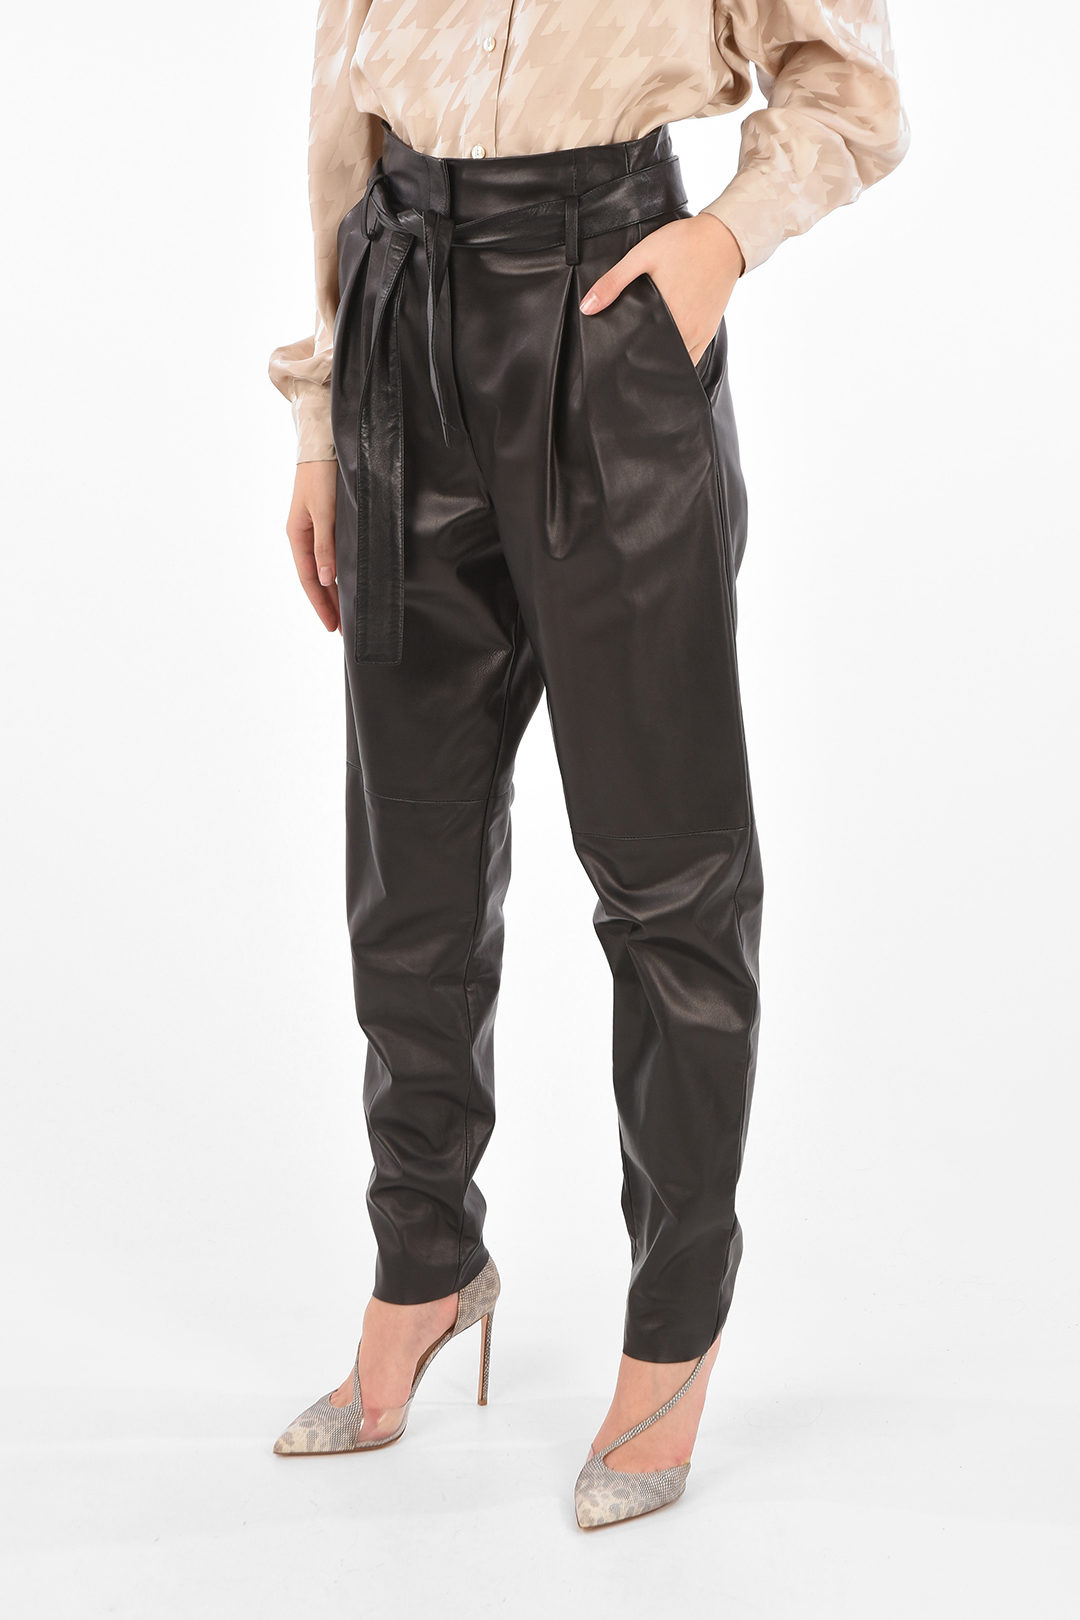 DROMe Leather Paper Bag Pants women - Glamood Outlet